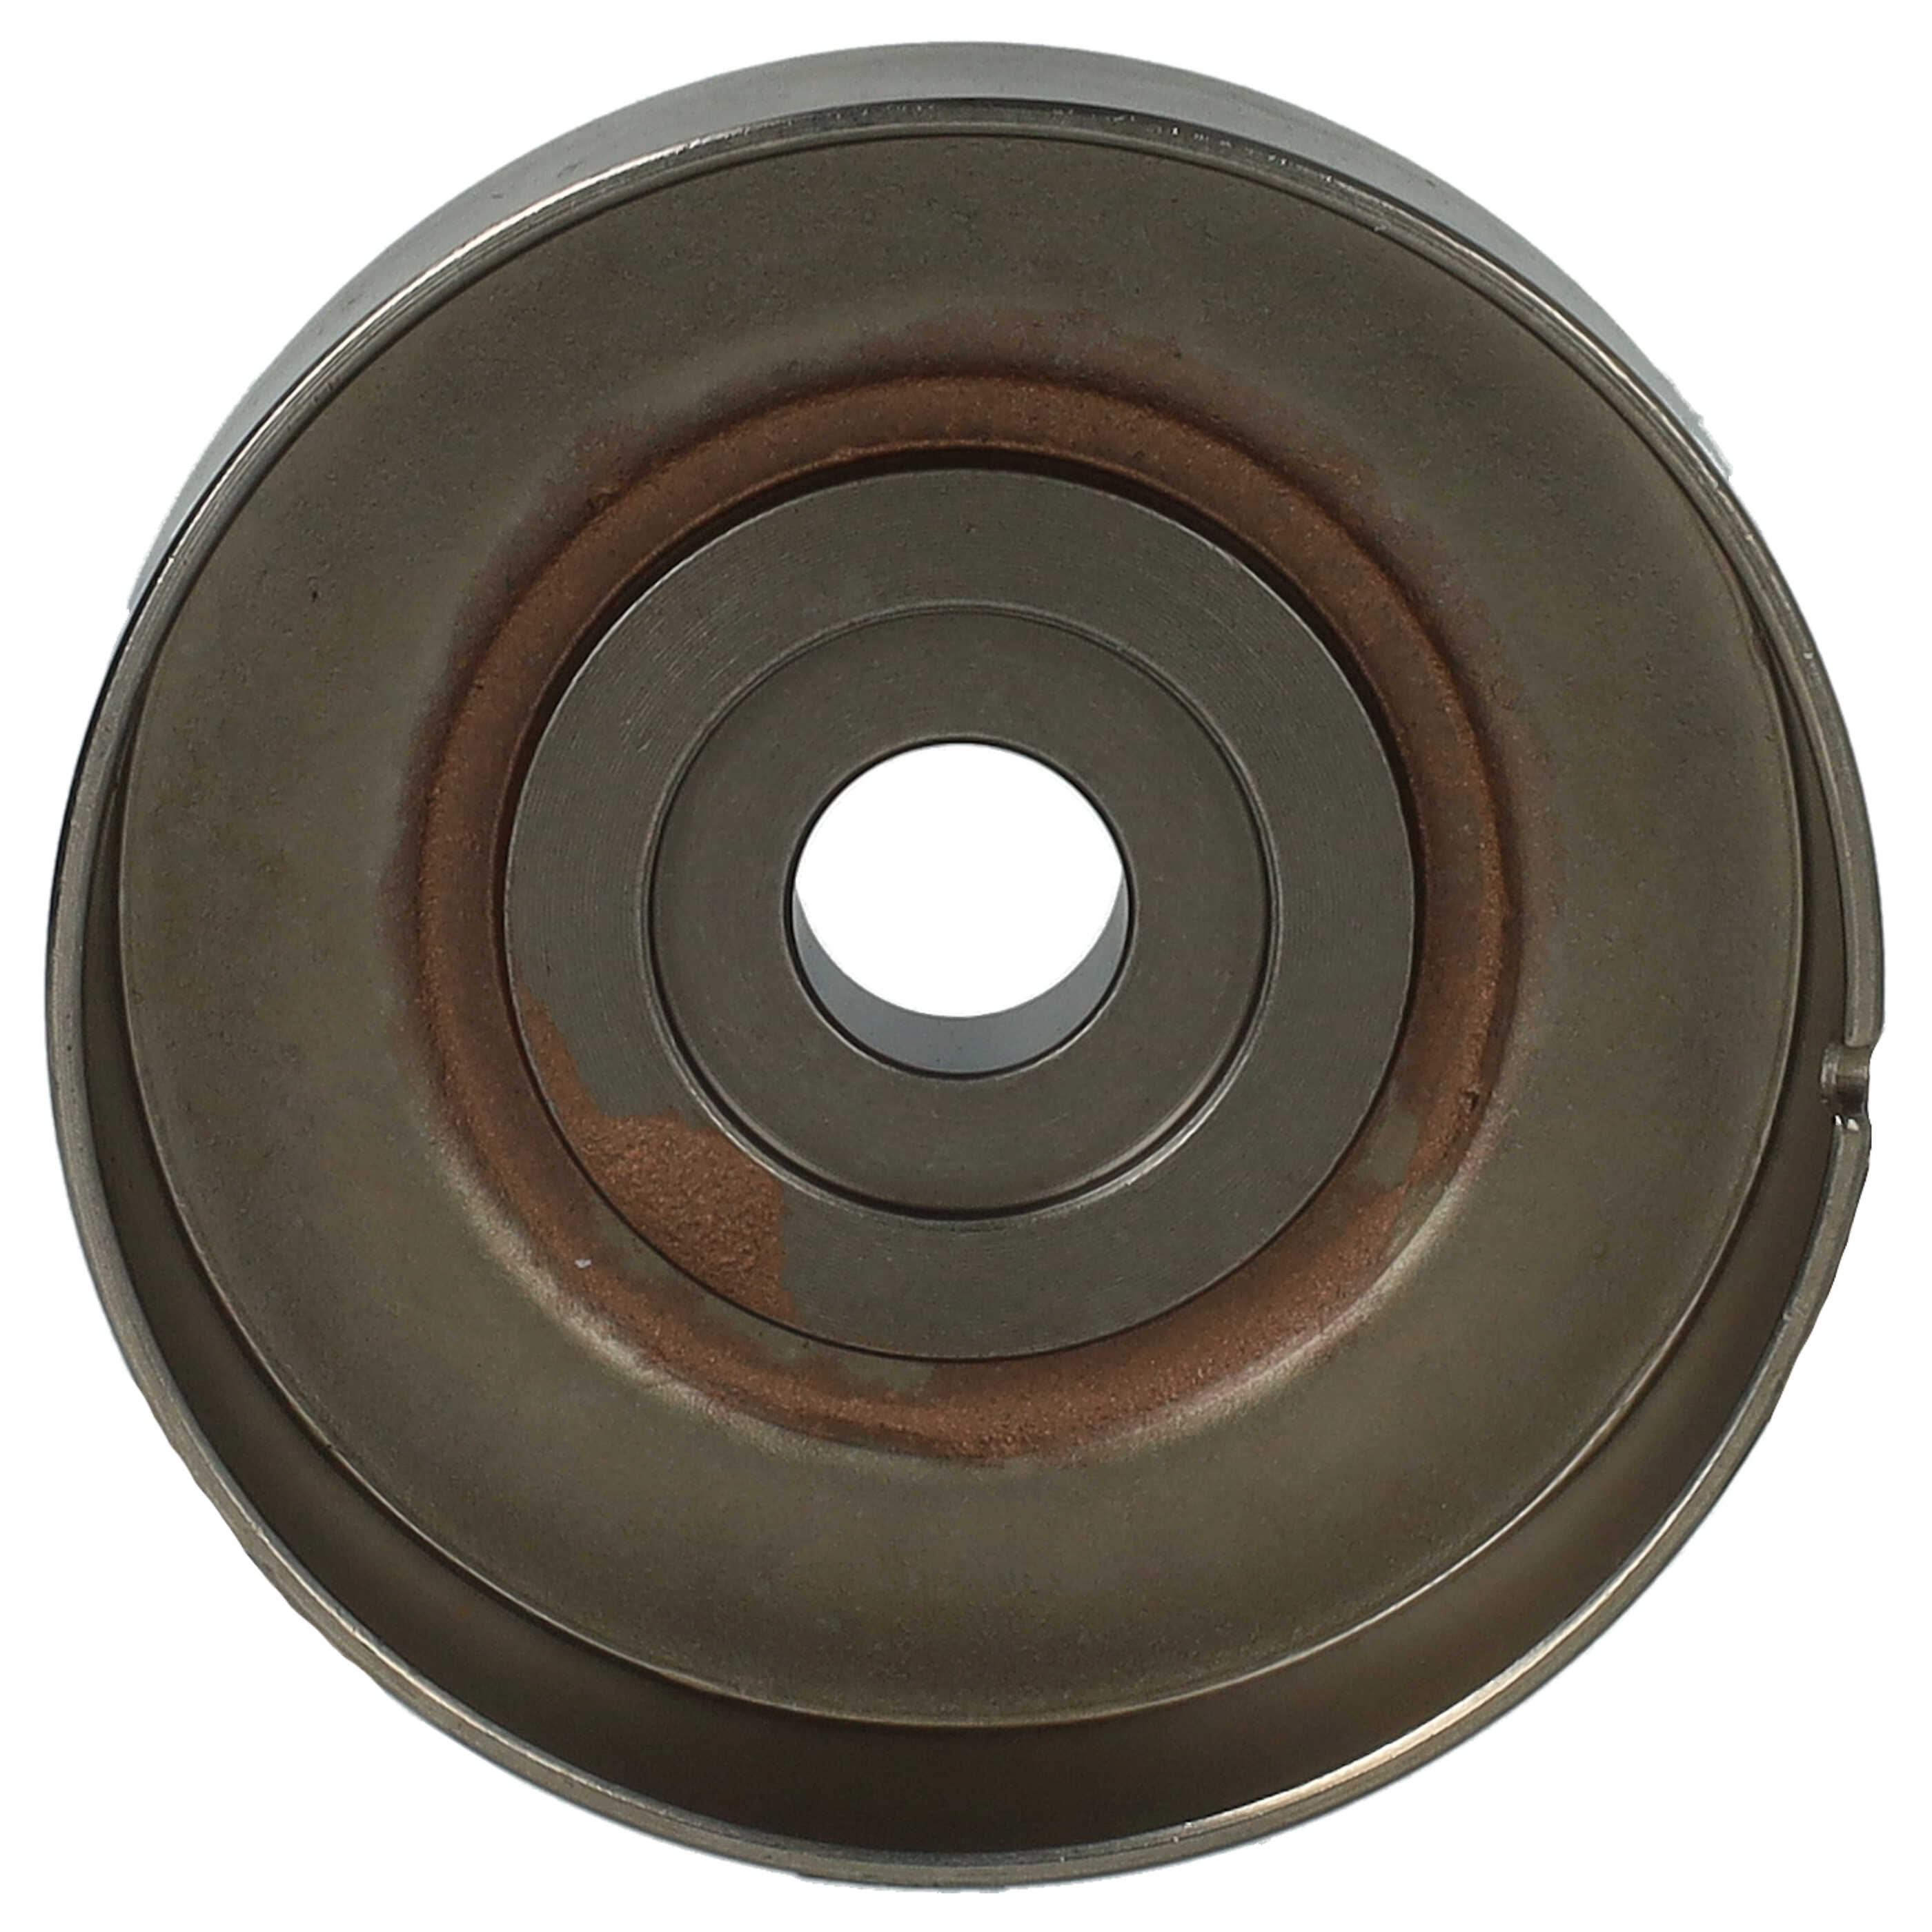 Reduction Ring incl. Needle Bearing as Replacement for Stihl 0000 642 1240 - Rim Sprocket, Chain Wheel 